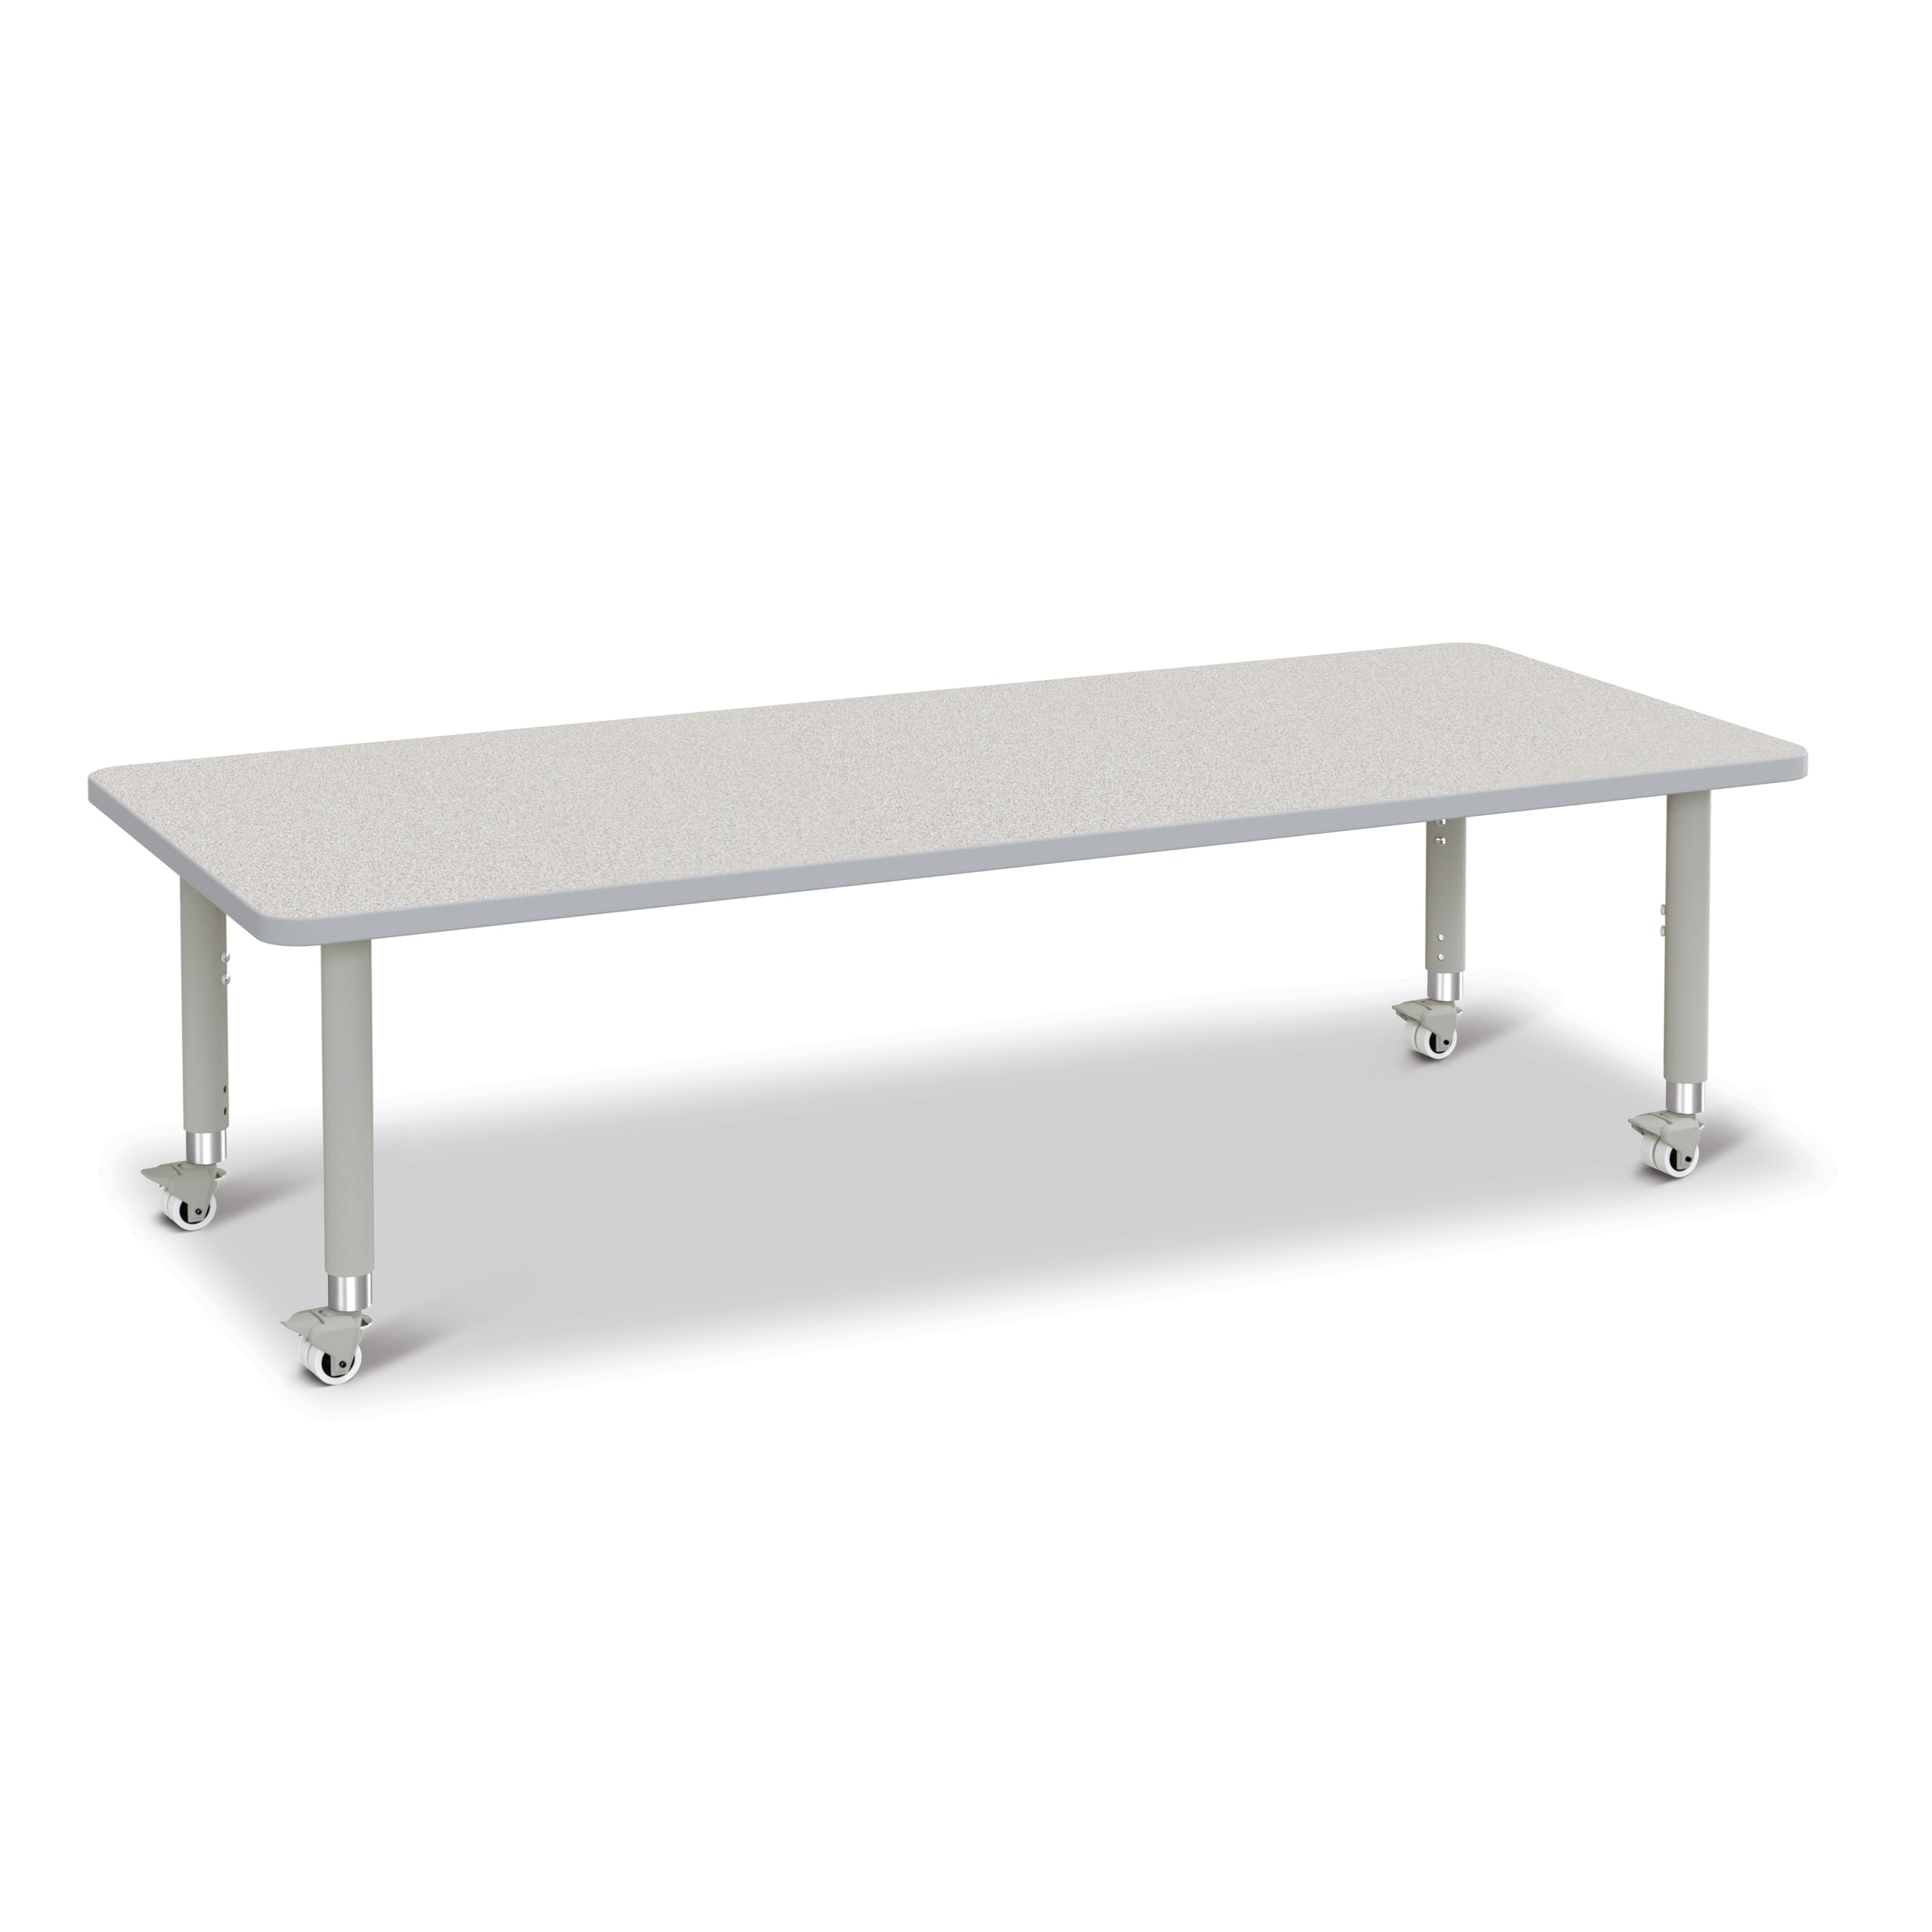 6413JCM000, Berries Rectangle Activity Table - 30" X 72", Mobile - Freckled Gray/Gray/Gray